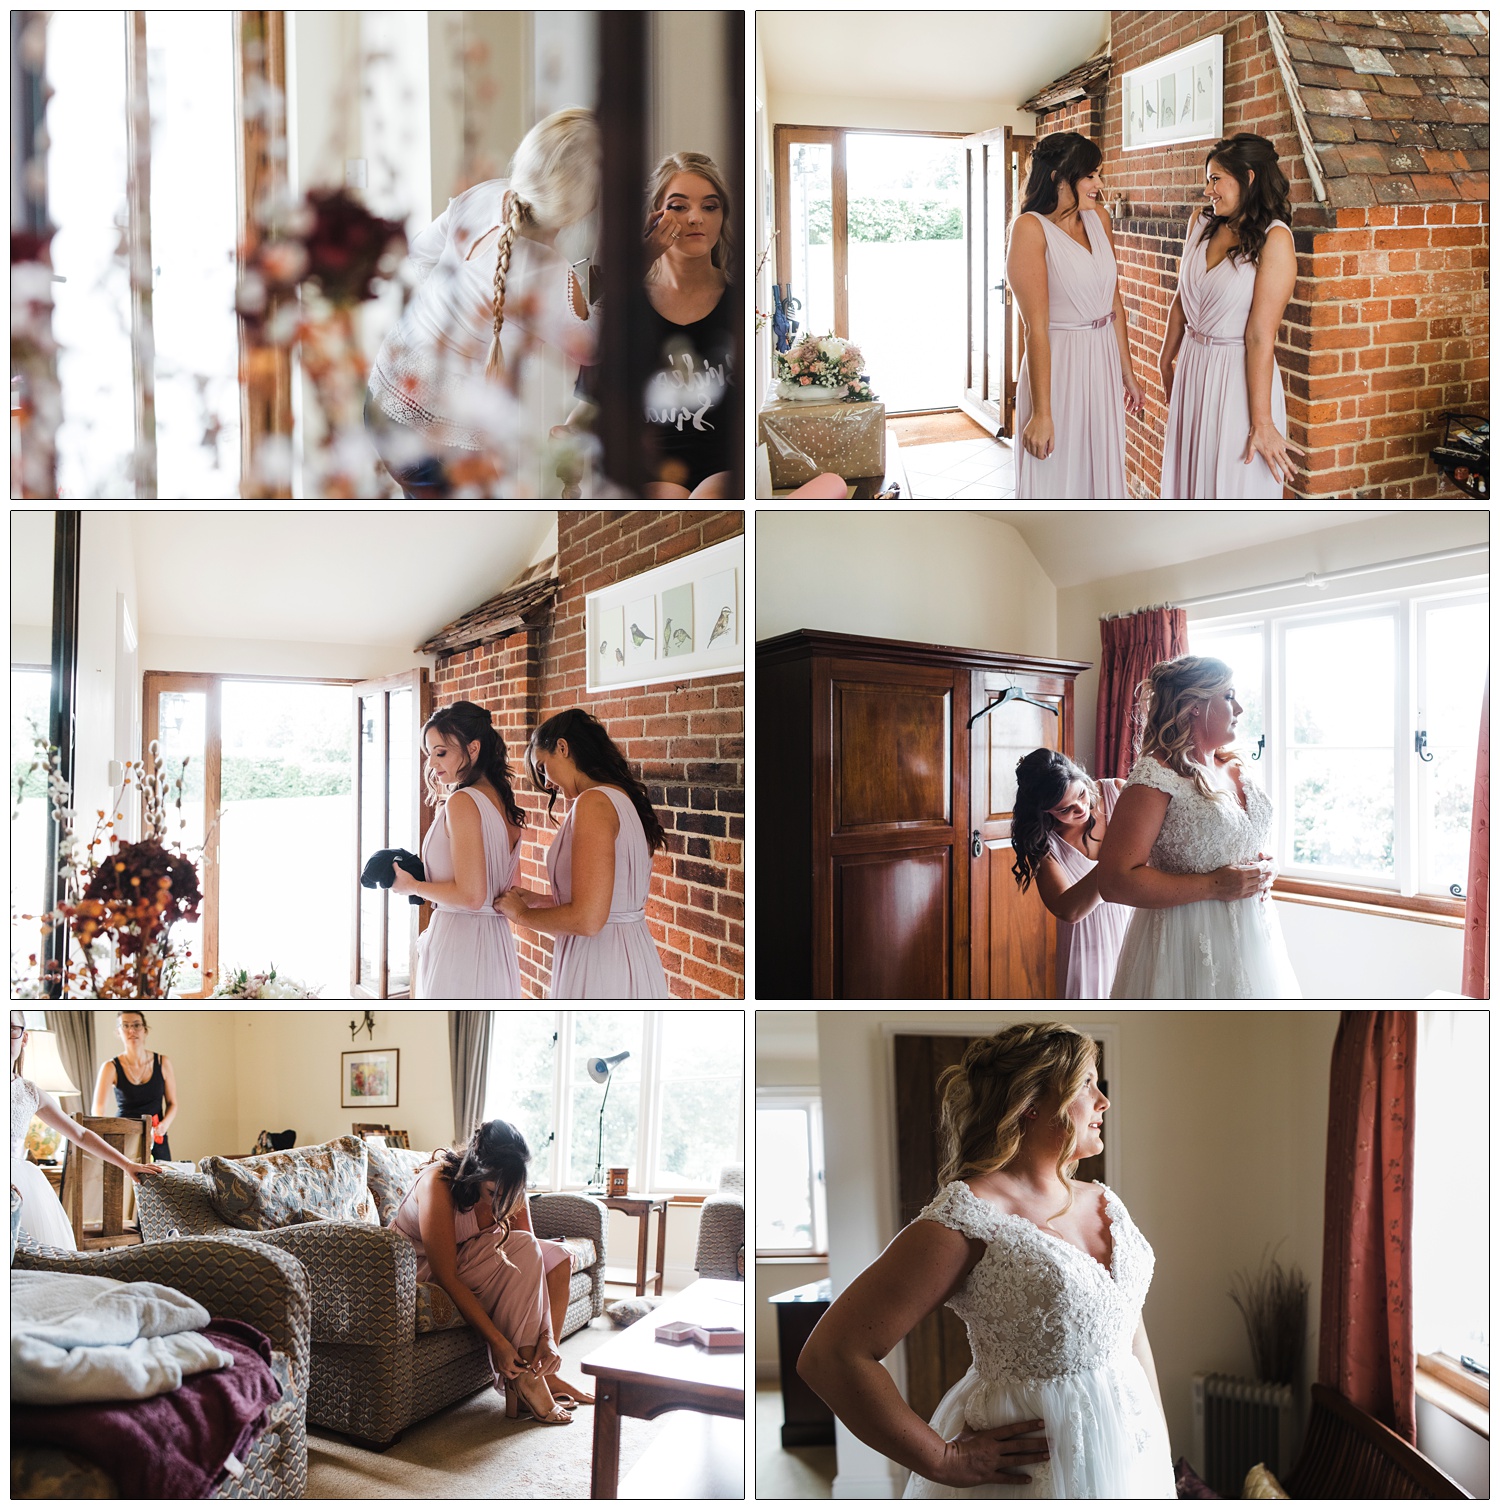 Candid pictures in an airbnb in Bocking. The bridal party are getting ready.